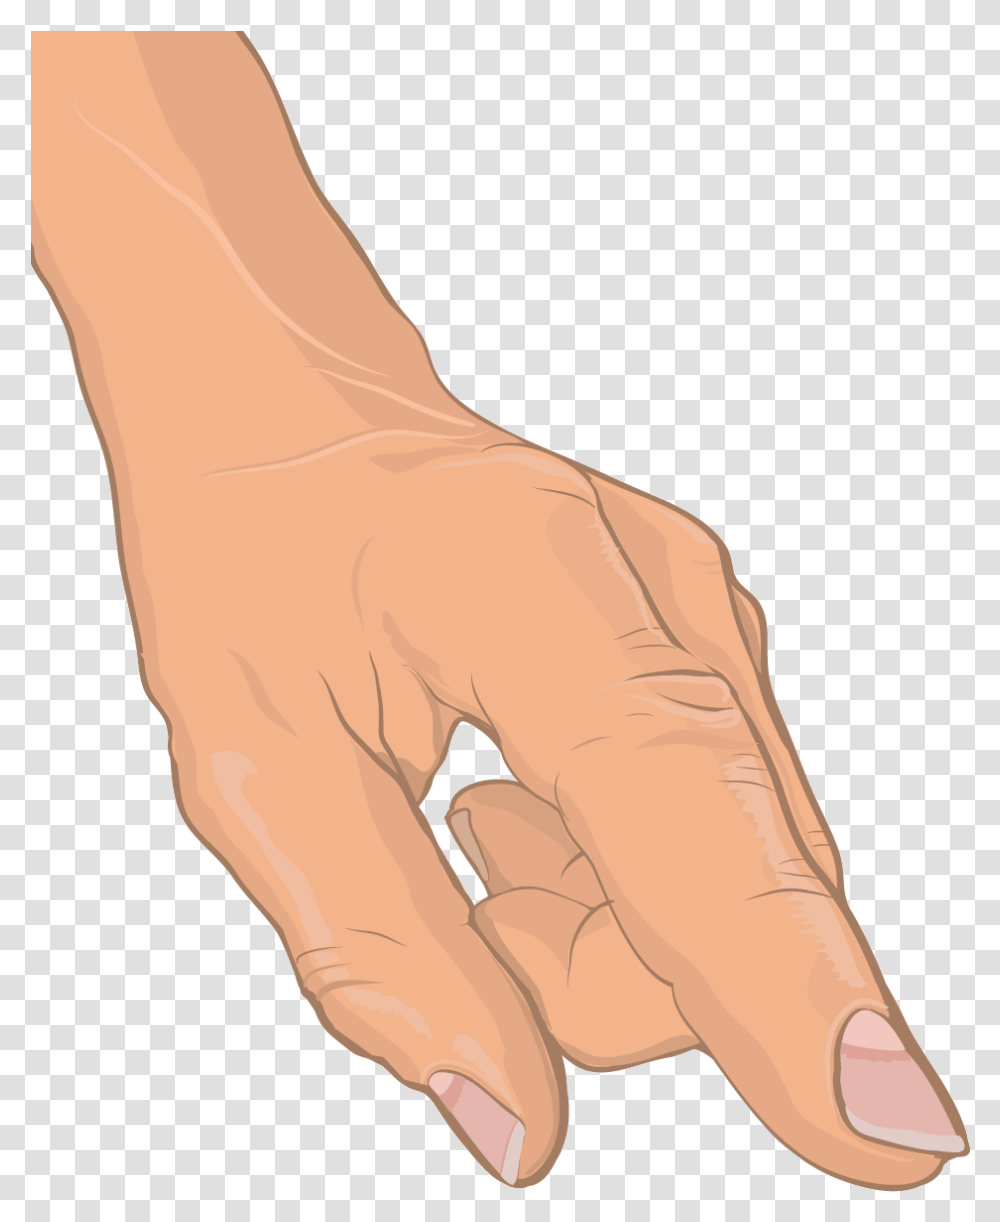 Anatomical Drawing Of Human Hand Sketch, Wrist, Person, Arm, Finger Transparent Png